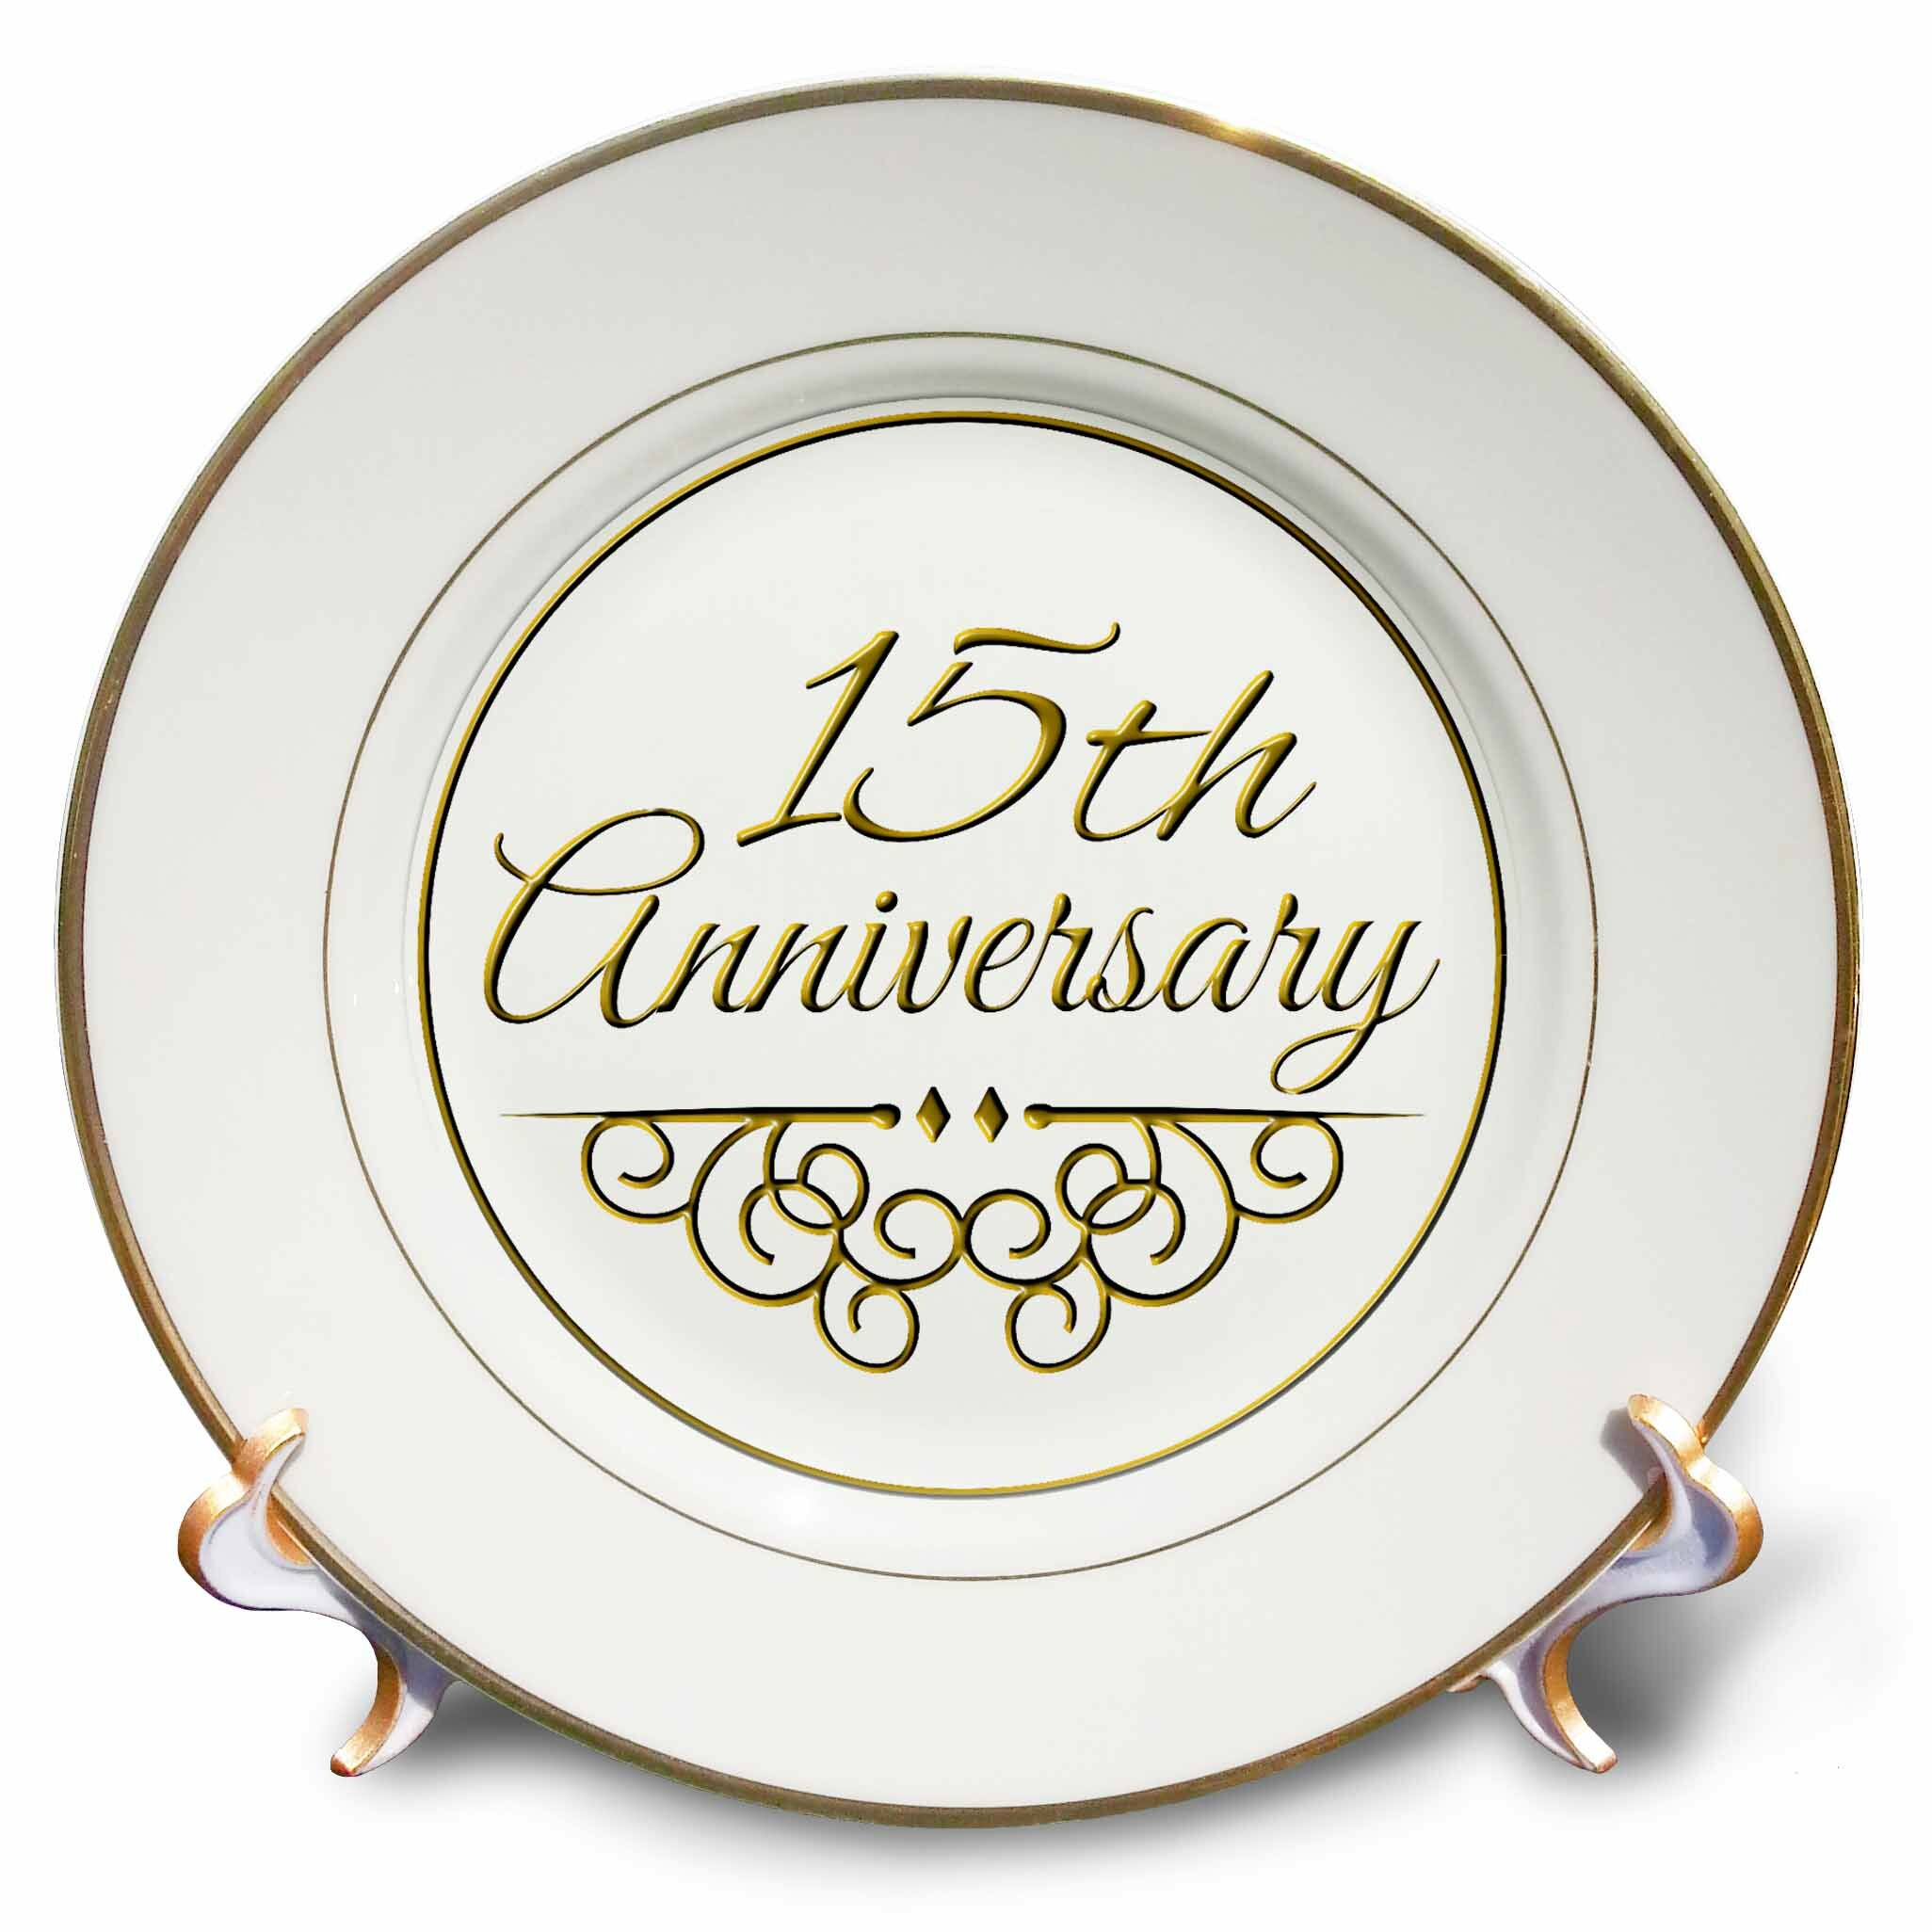 East Urban Home 15th Anniversary Gift For Celebrating Wedding Anniversaries 15 Years Married Together Porcelain Decorative Plate Wayfair